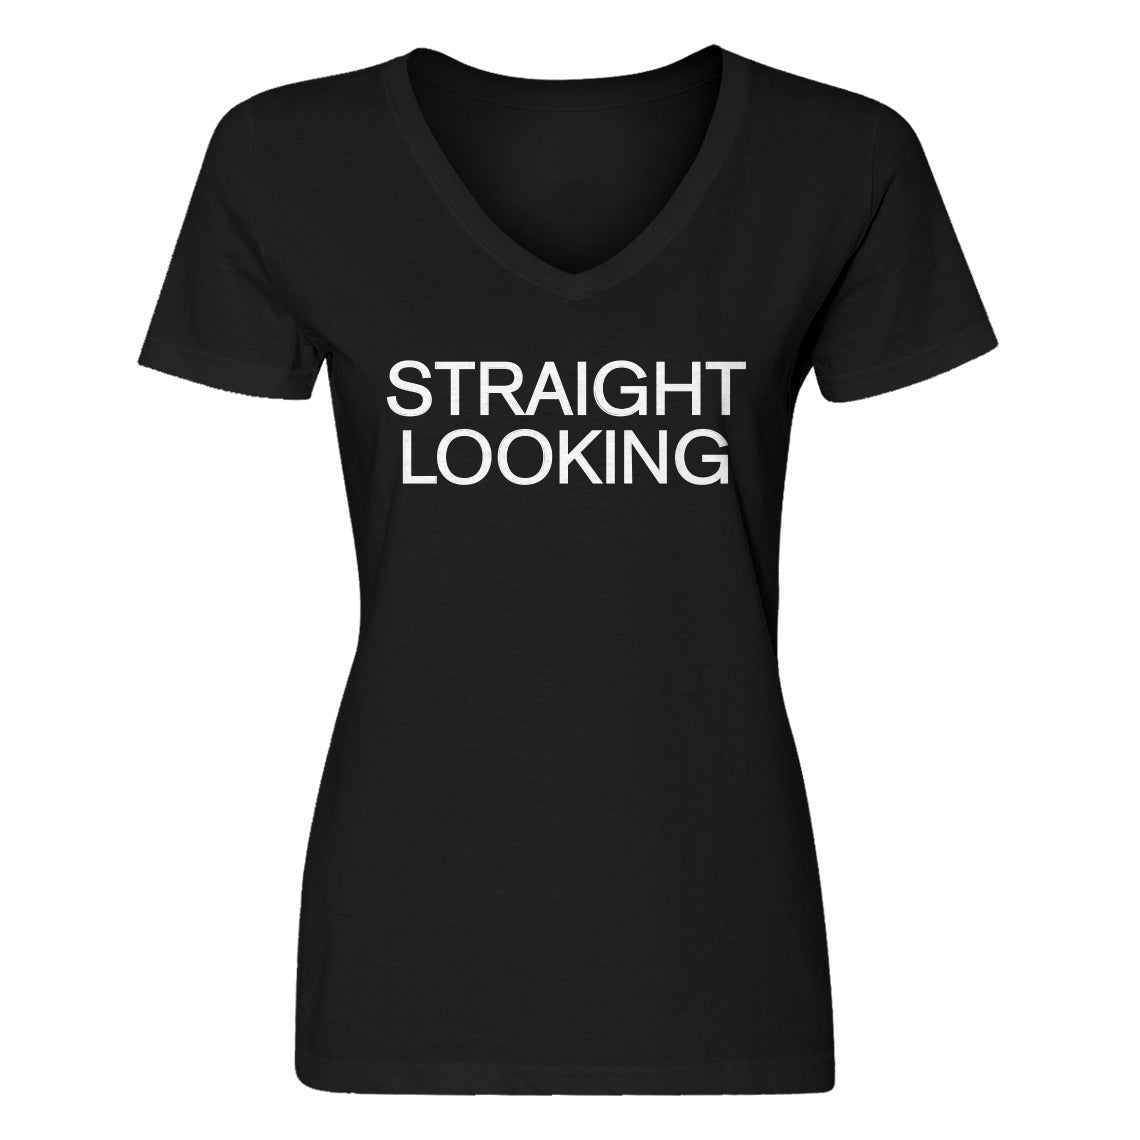 Womens Straight Looking V-Neck T-shirt